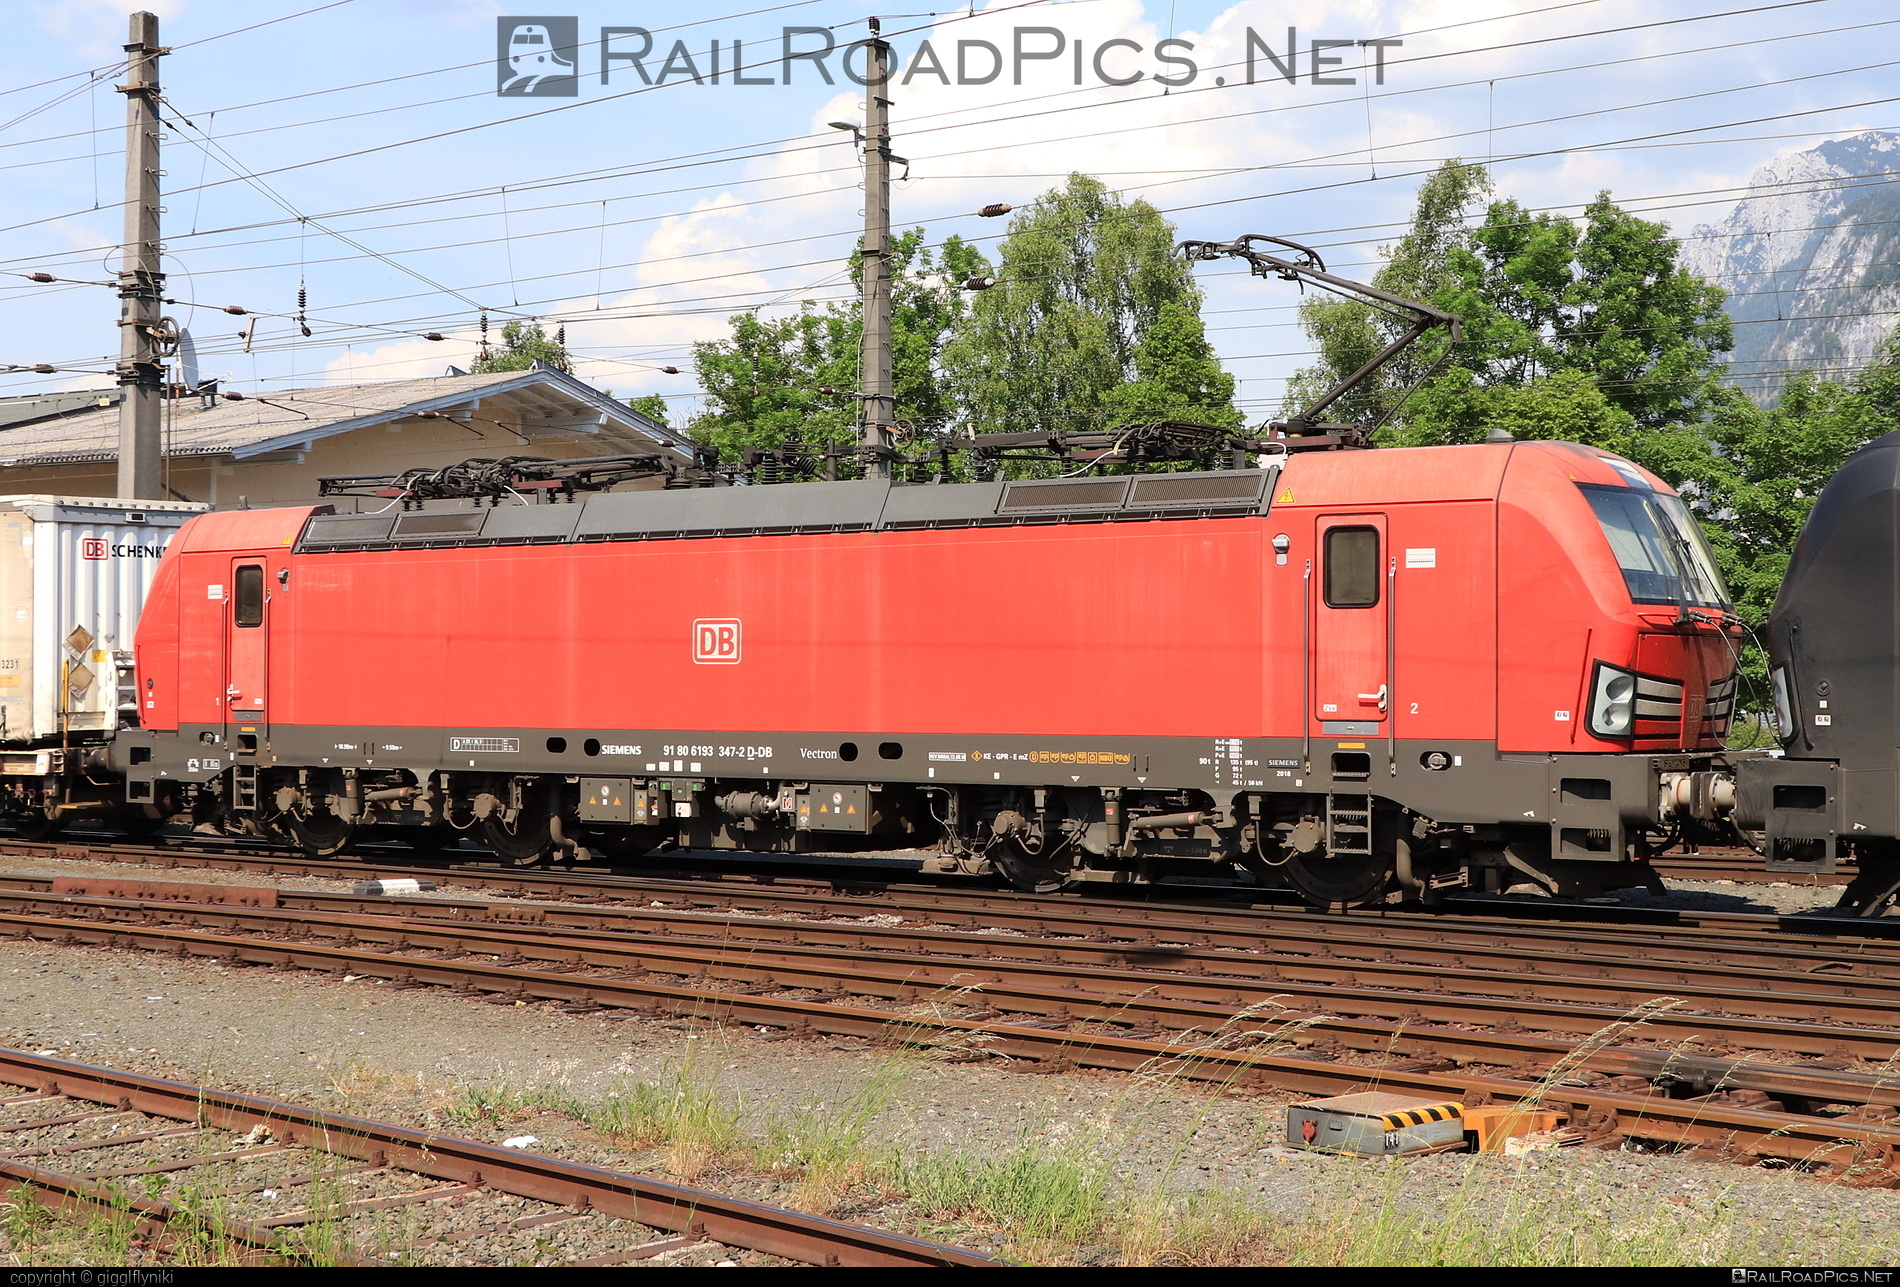 Siemens Vectron MS - 193 347 operated by DB Cargo AG #db #dbcargo #dbcargoag #deutschebahn #siemens #siemensVectron #siemensVectronMS #vectron #vectronMS